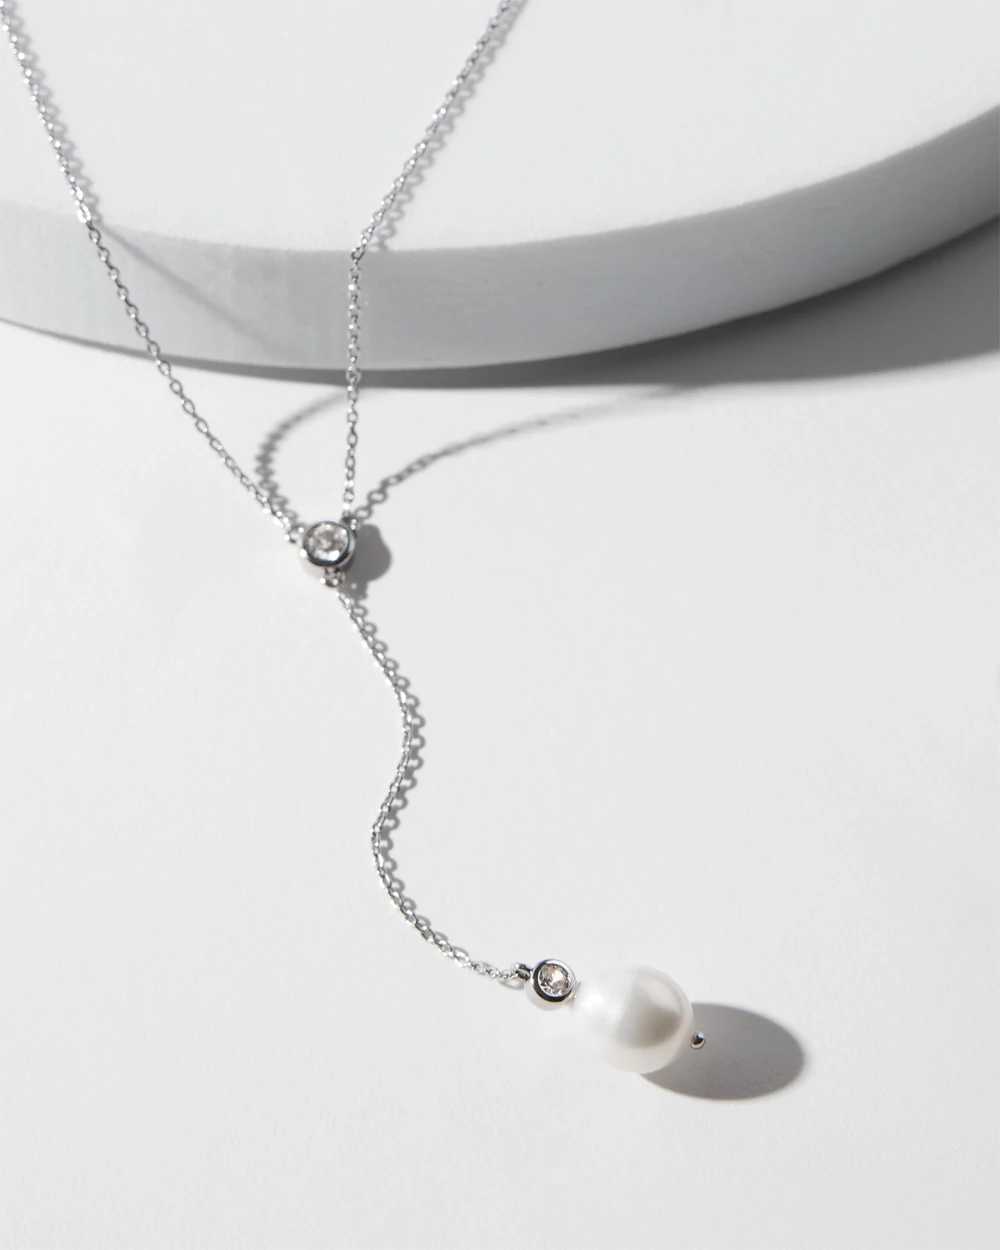 Silver Fresh Water Pearl Drop Necklace click to view larger image.